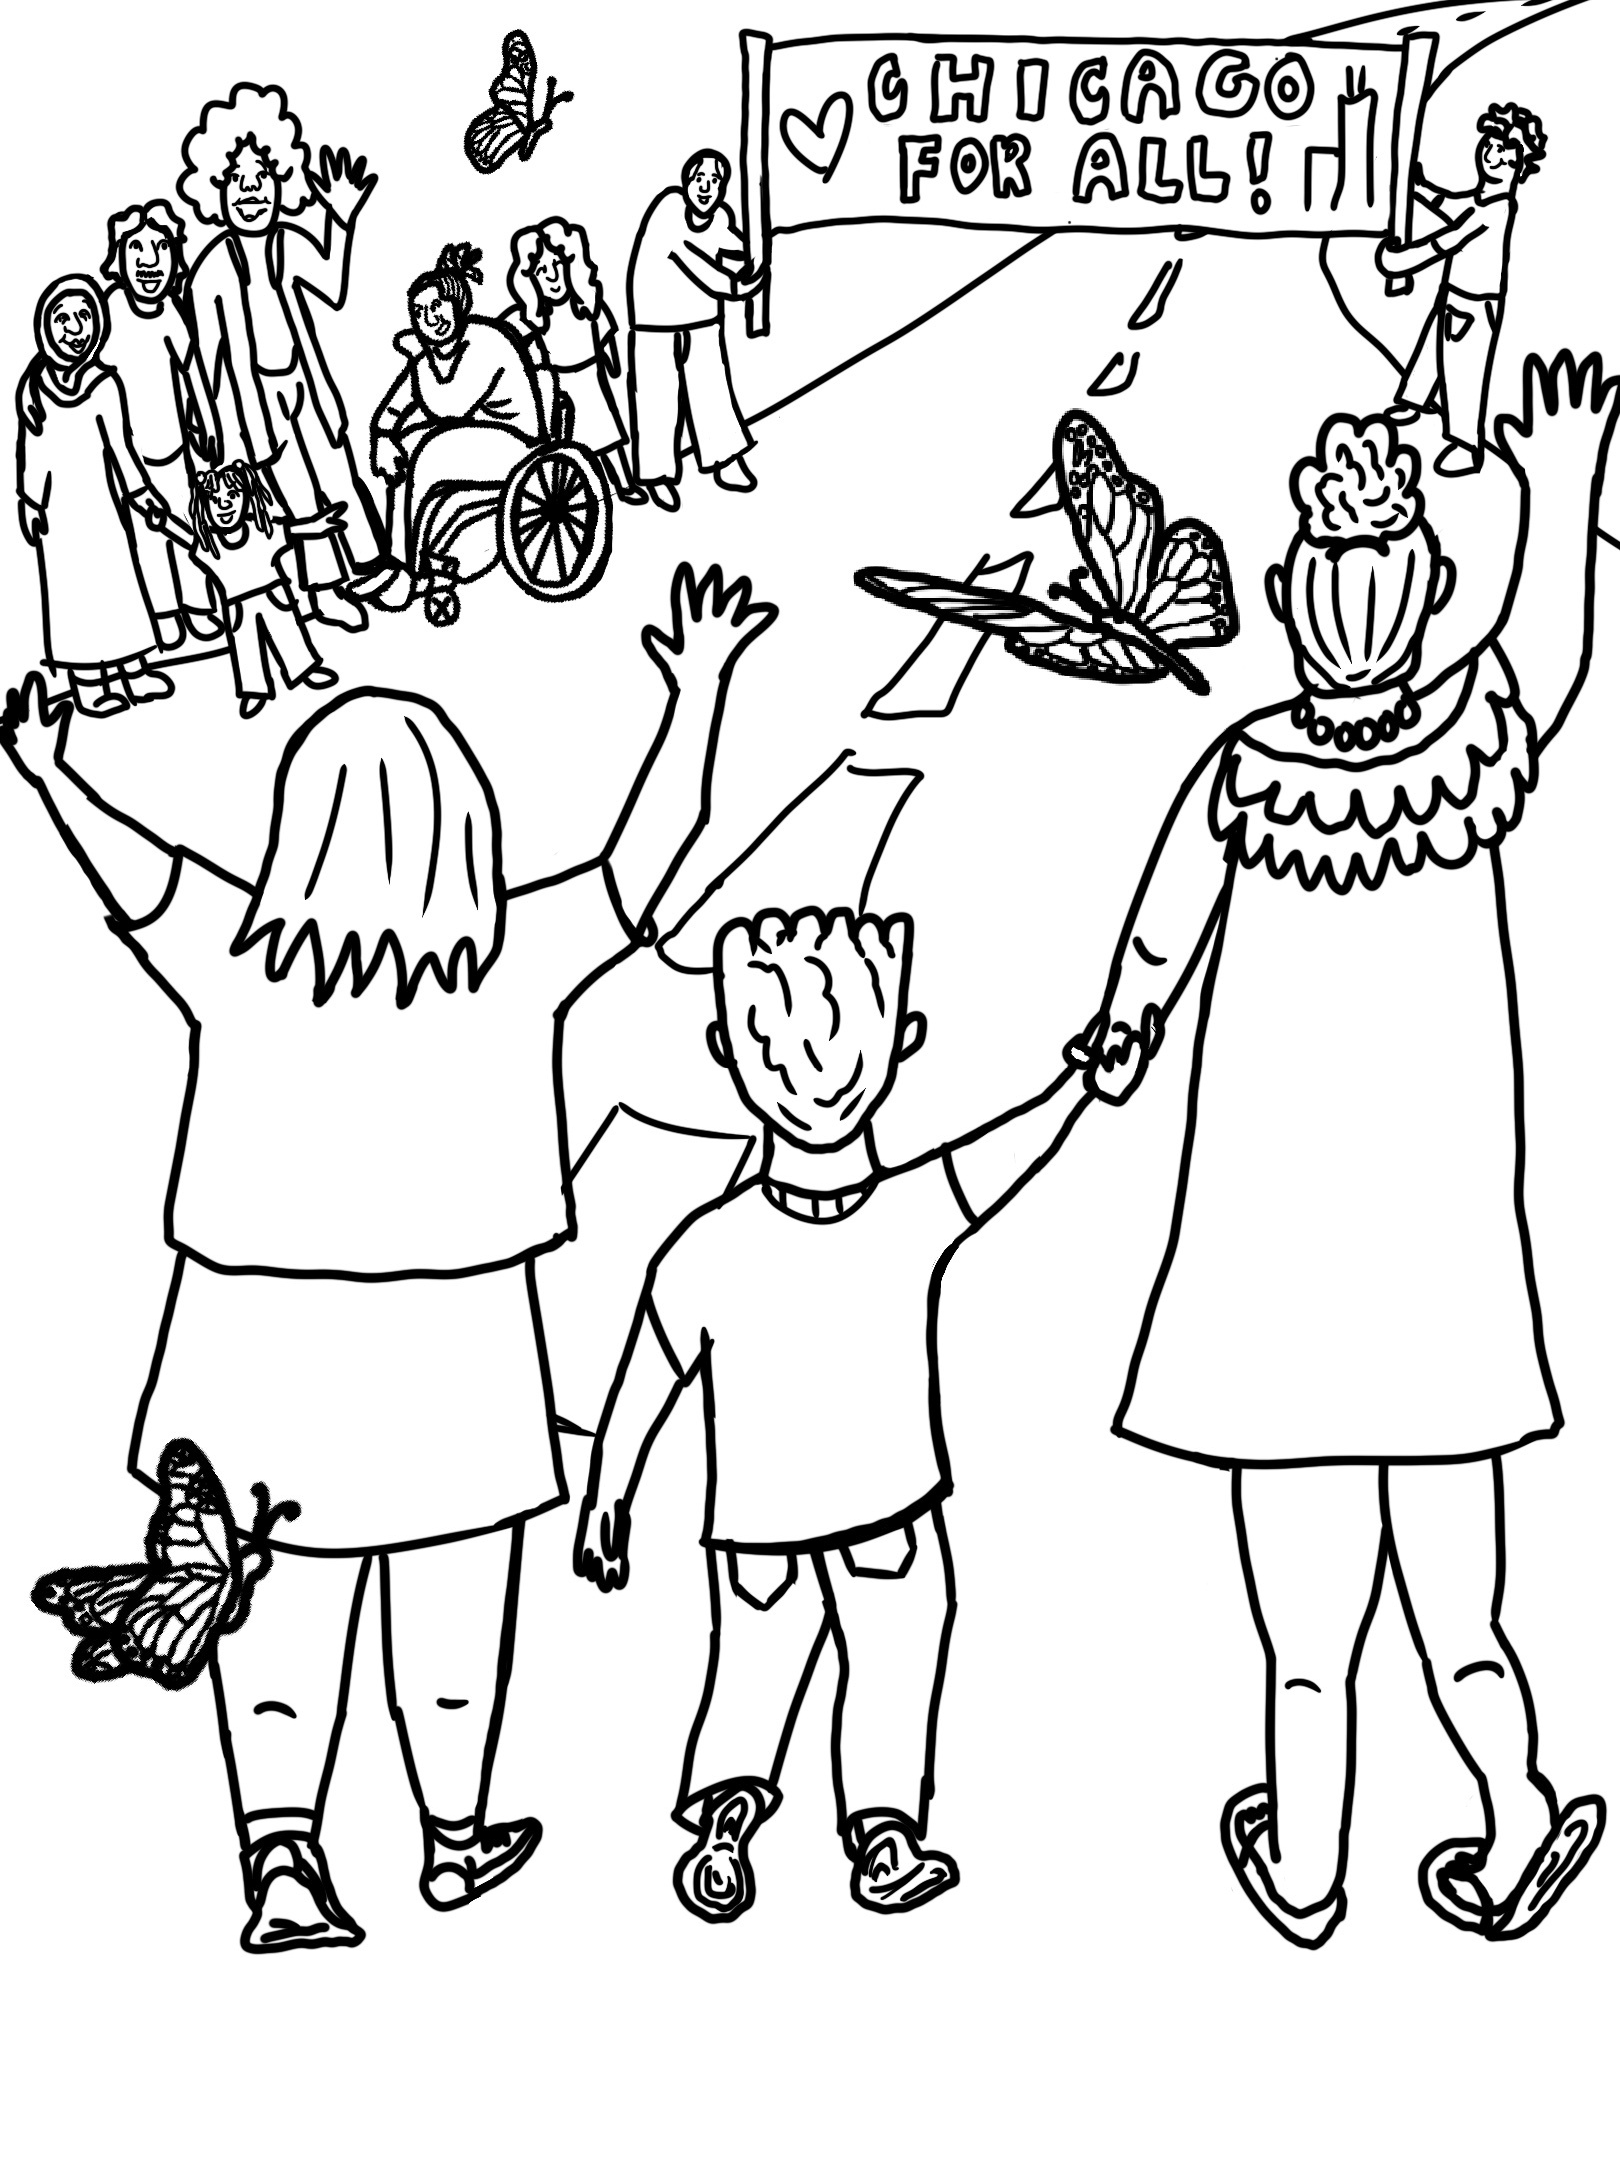 Palenque Coloring Book pg3_Page_2_Image_0001.png